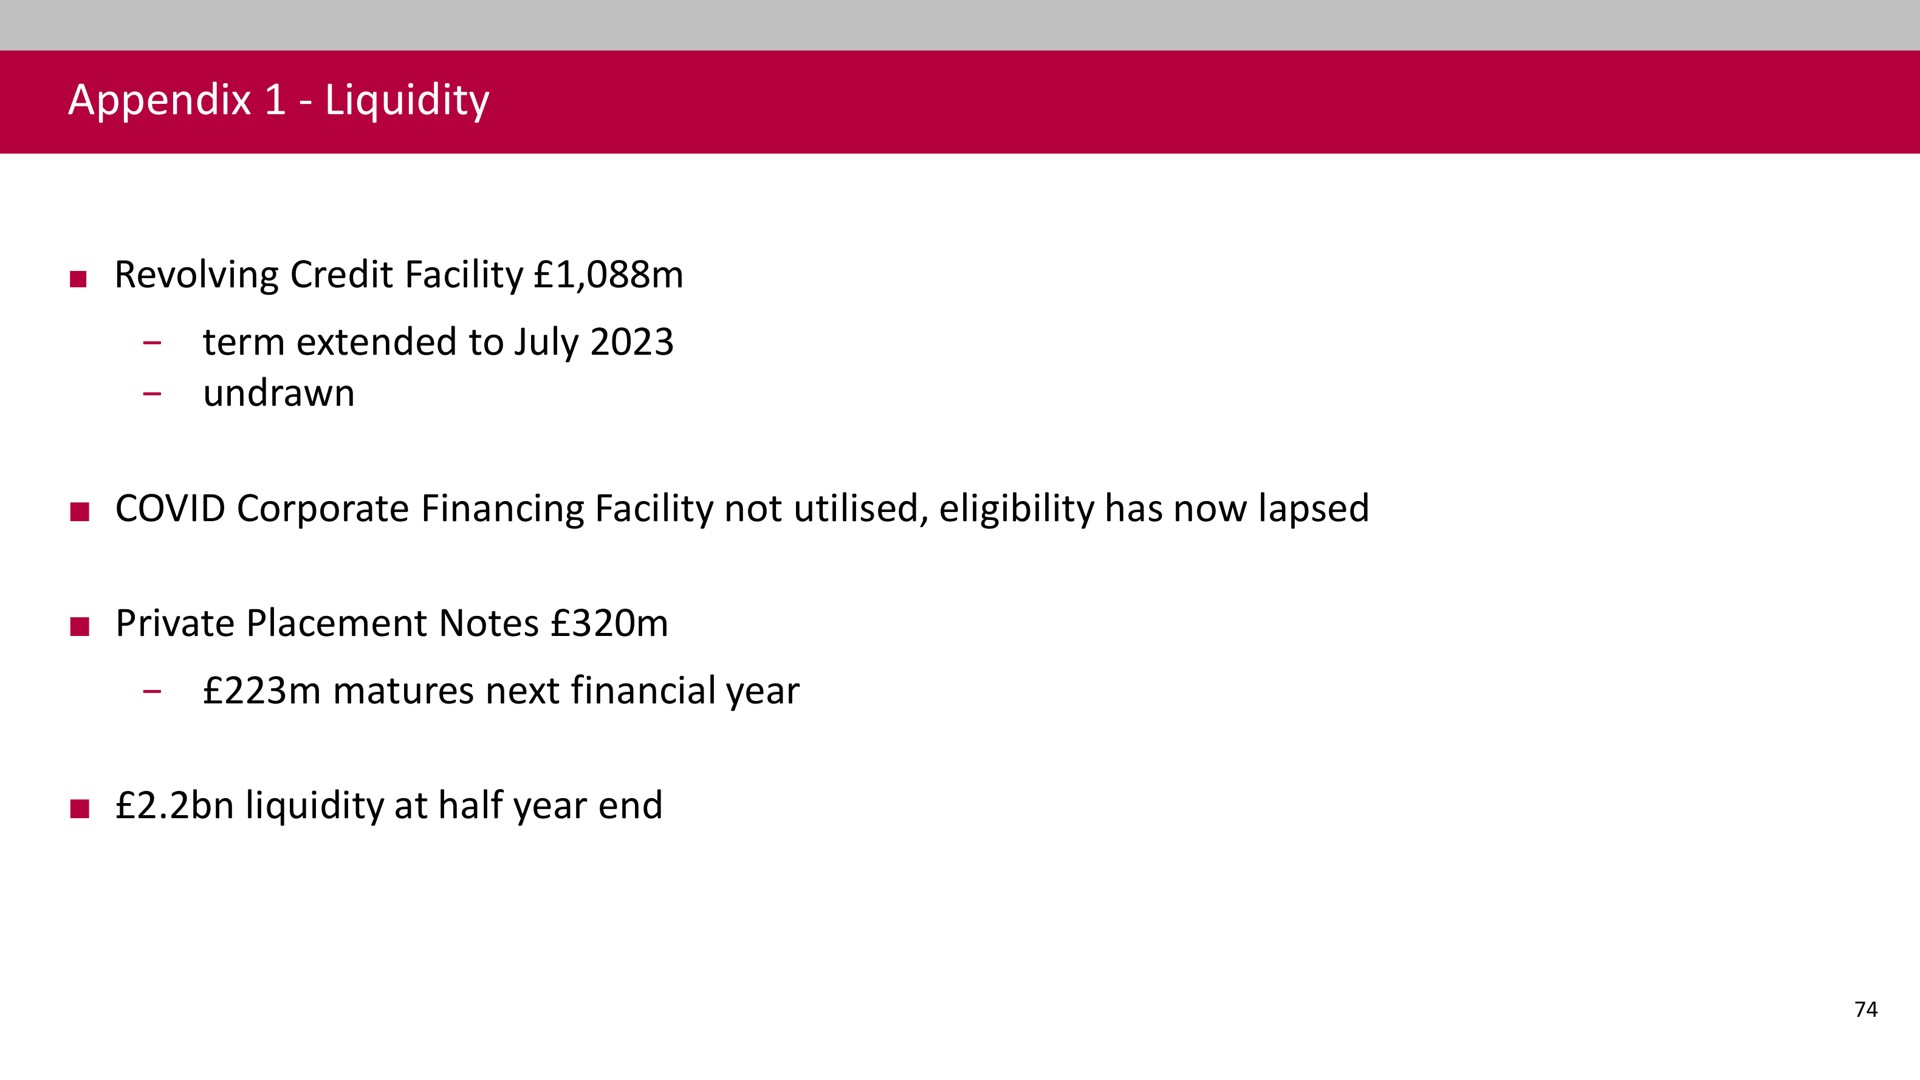 appendix liquidity revolving credit facility term extended to undrawn covid corporate financing facility not eligibility has now lapsed private placement notes matures next financial year liquidity at half year end | Associated British Foods